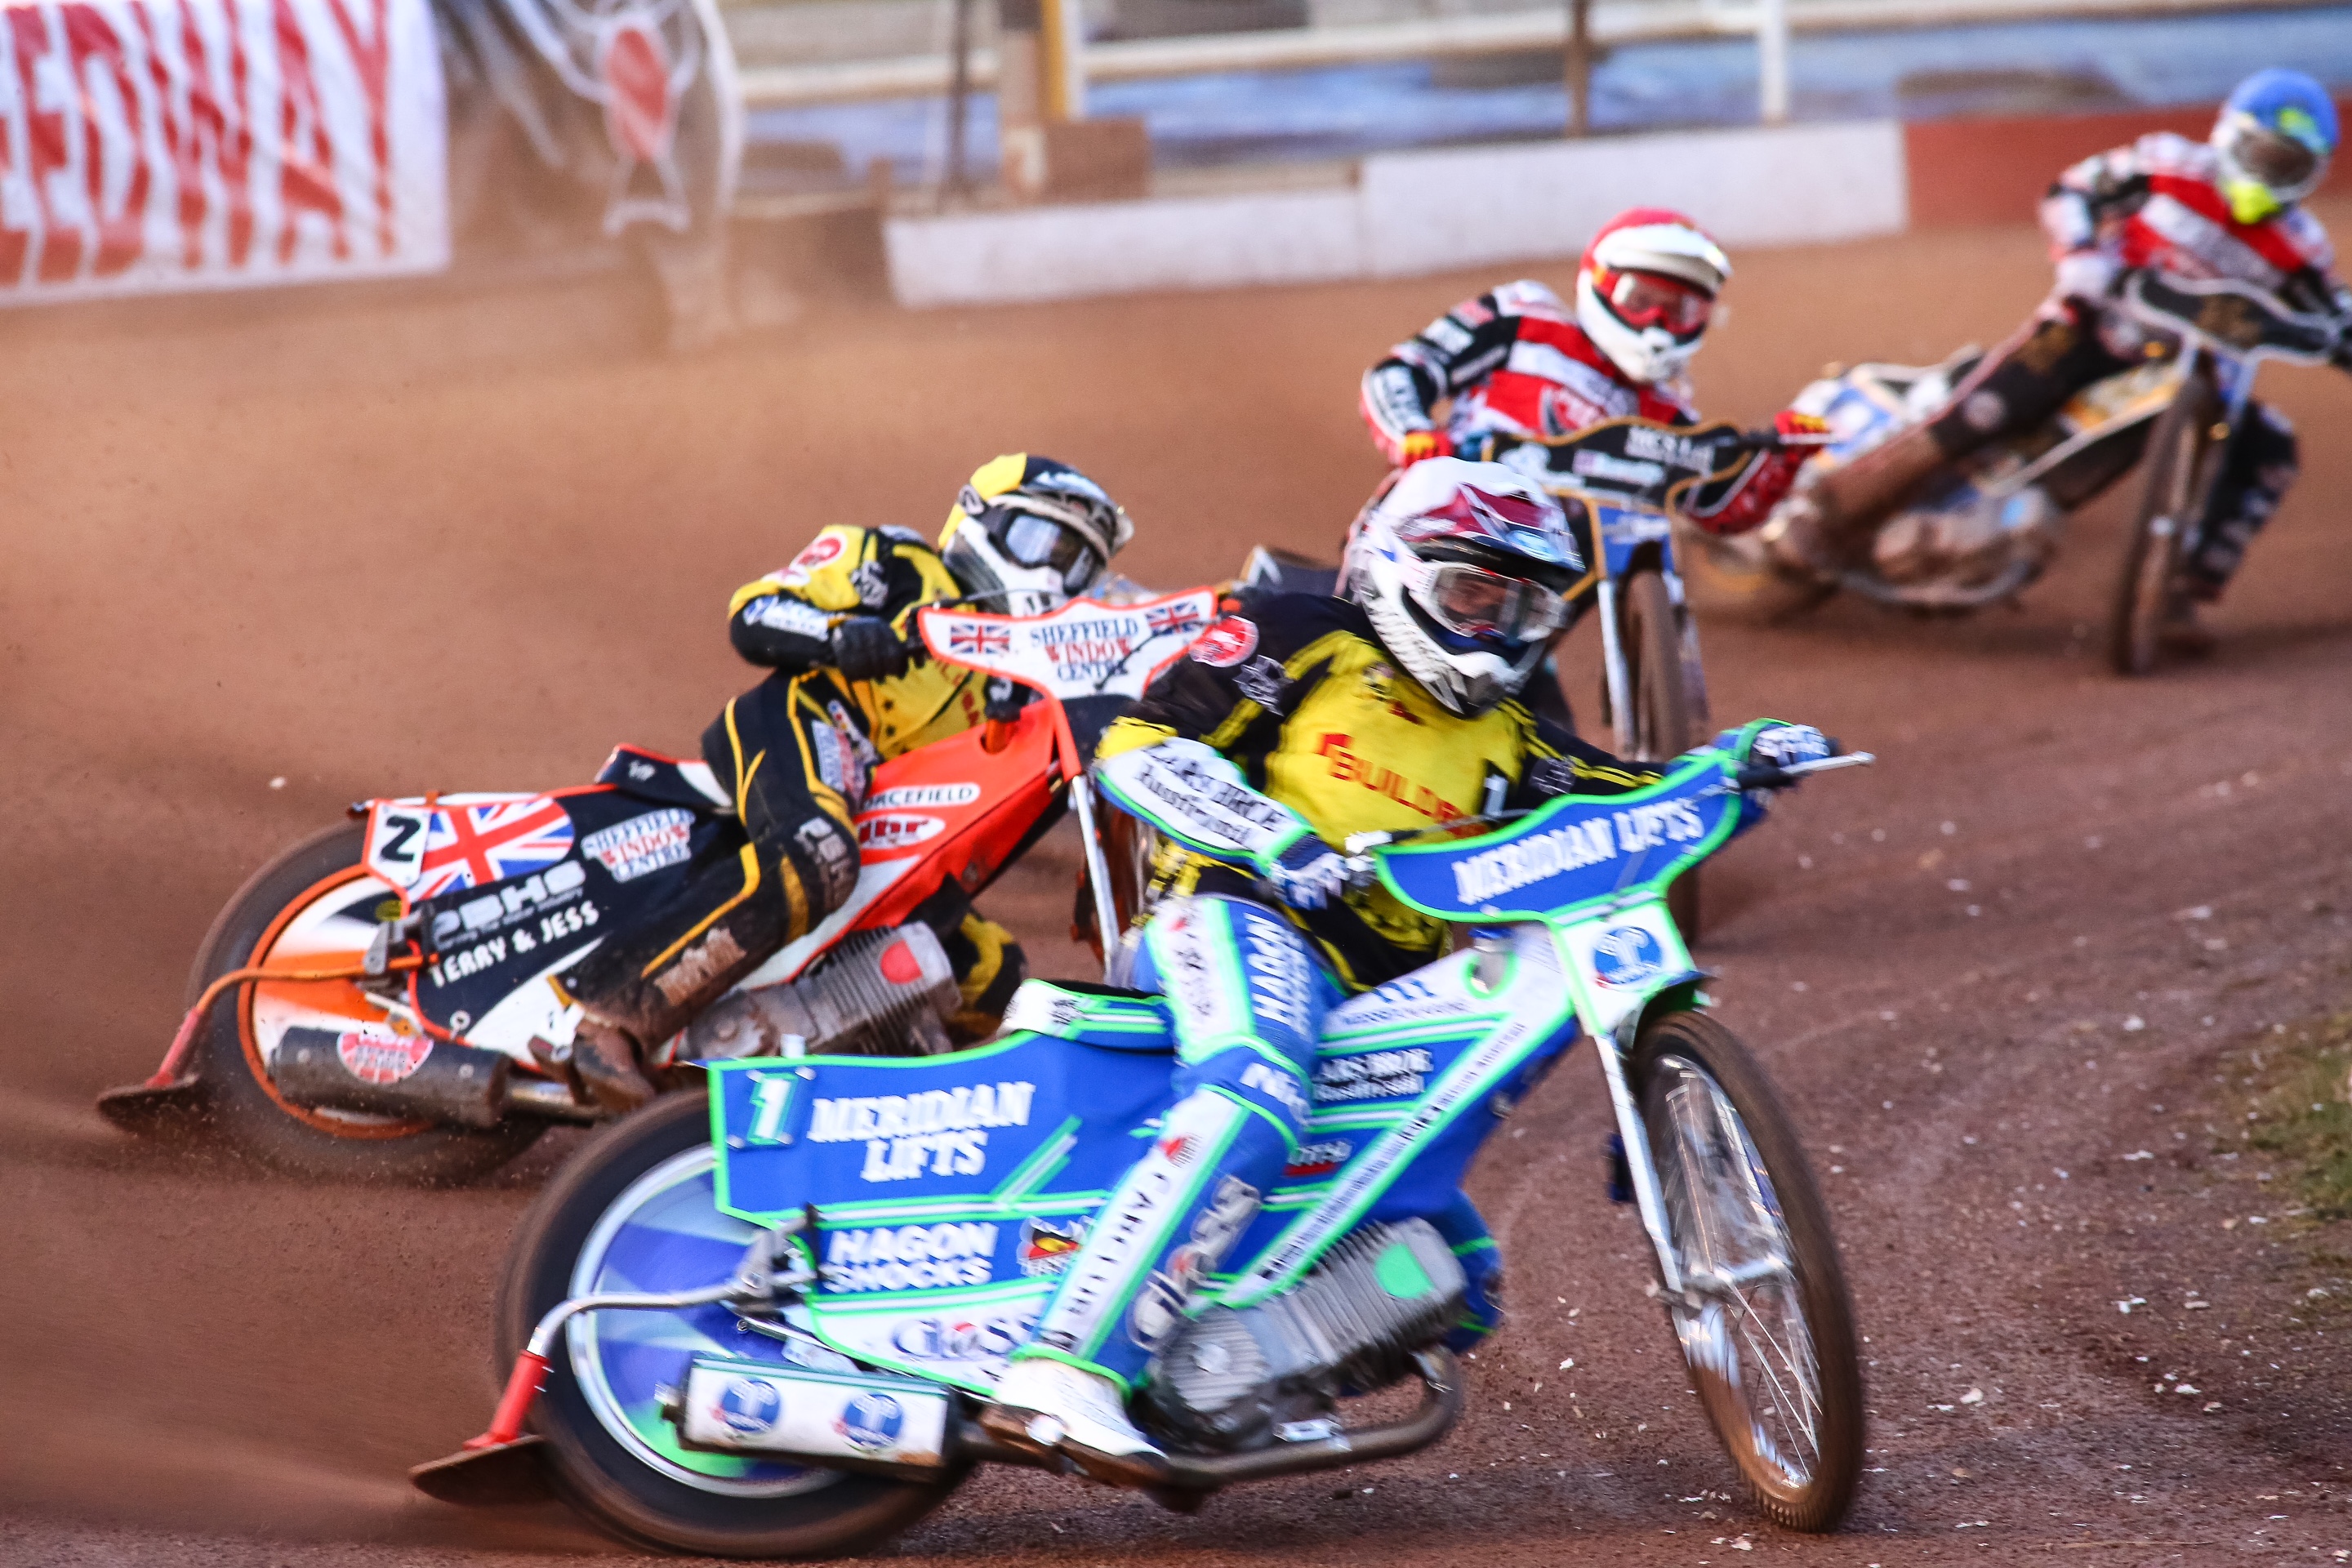 Swindon Robins vs Leicester Lions: Race preview